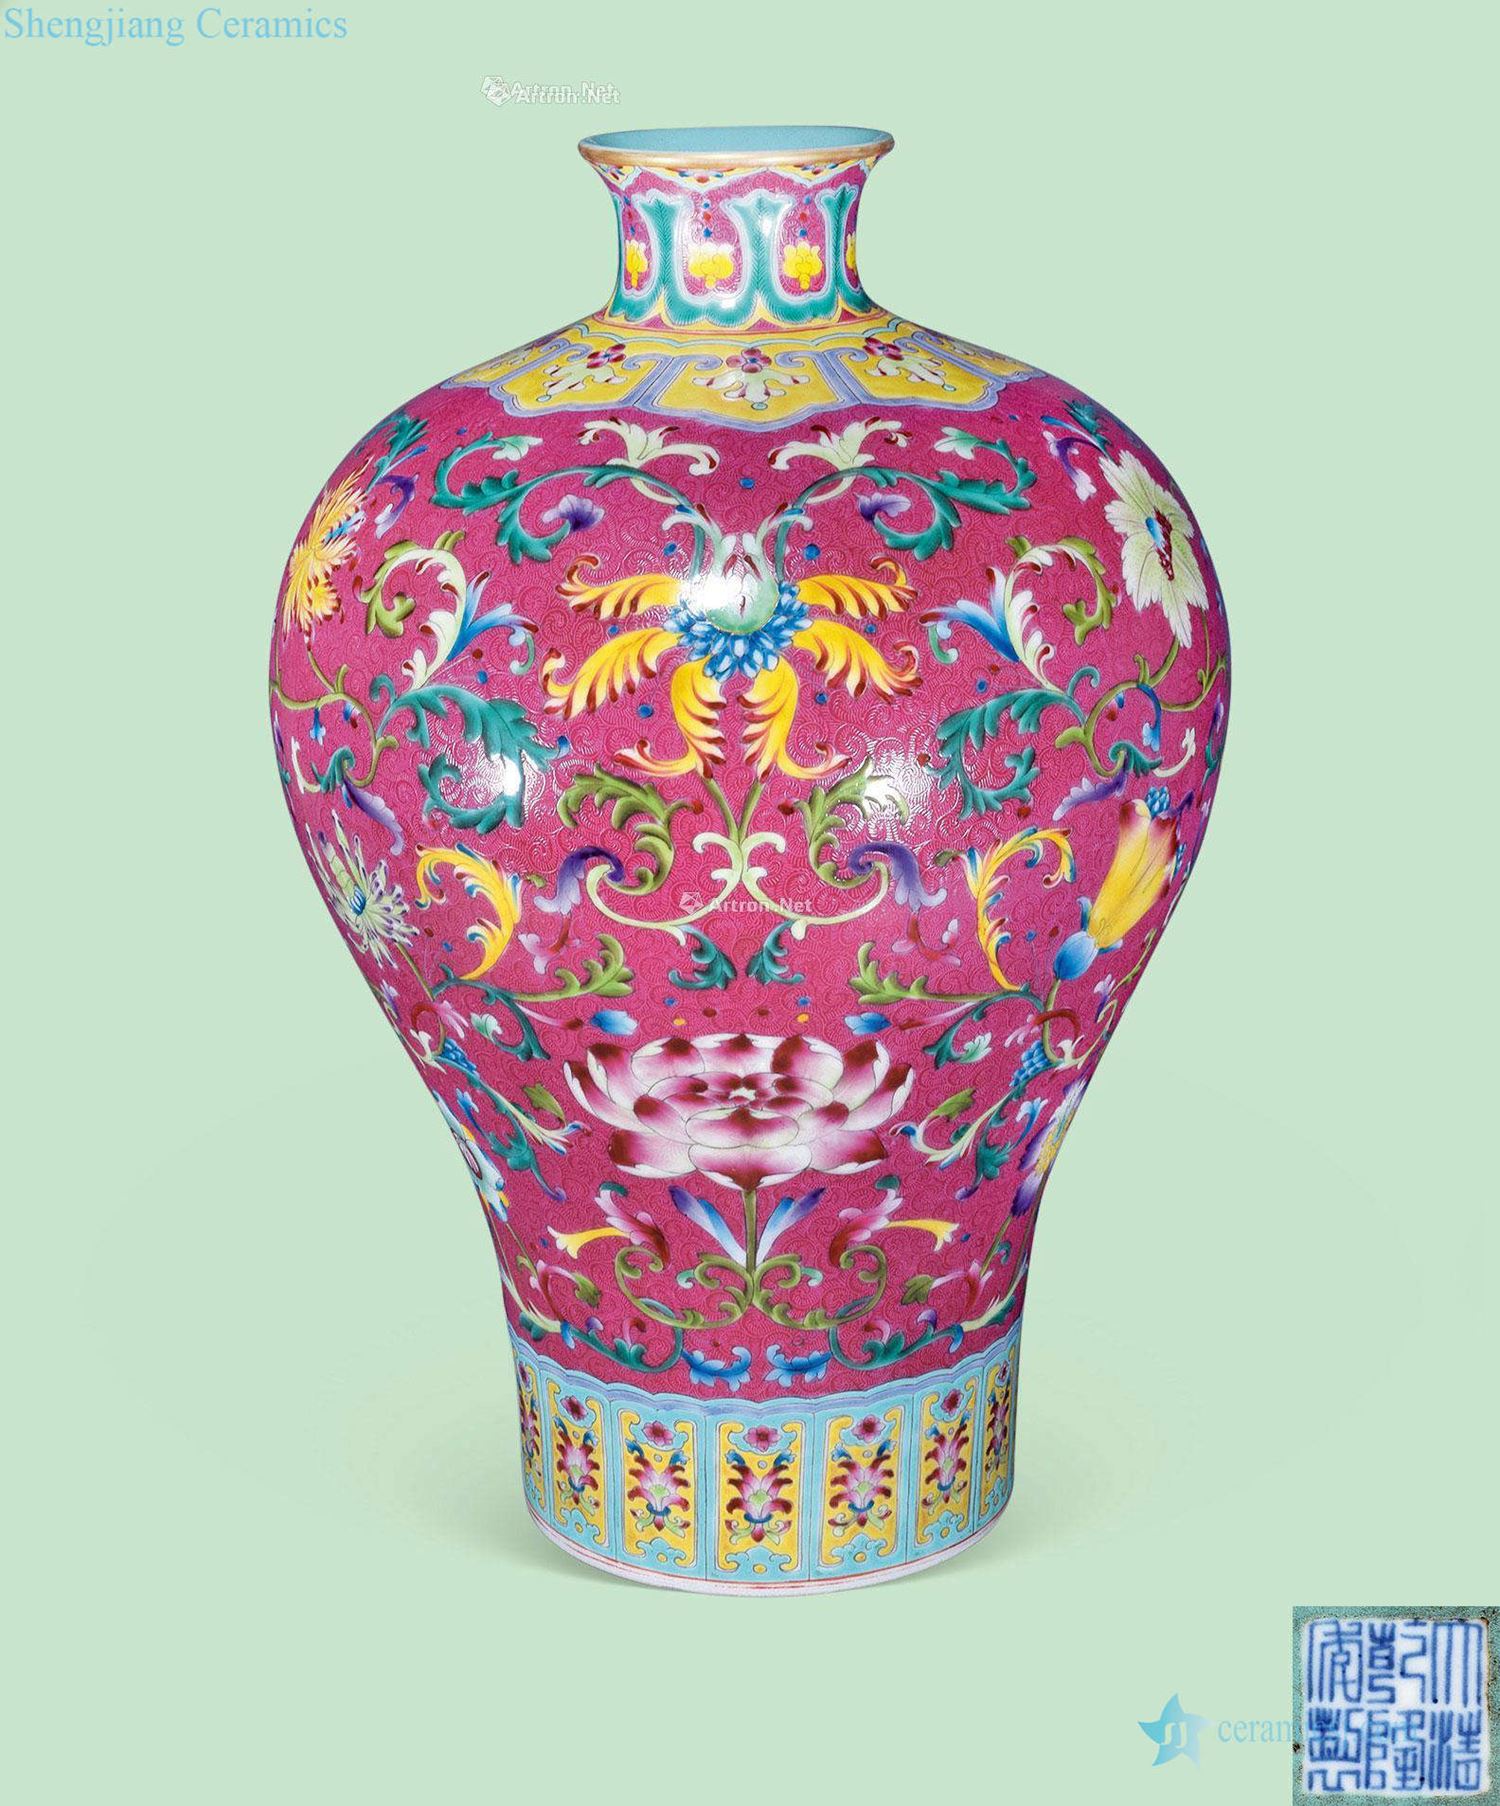 Qing carmine to squeeze the pastel bound branch flowers lines may bottle